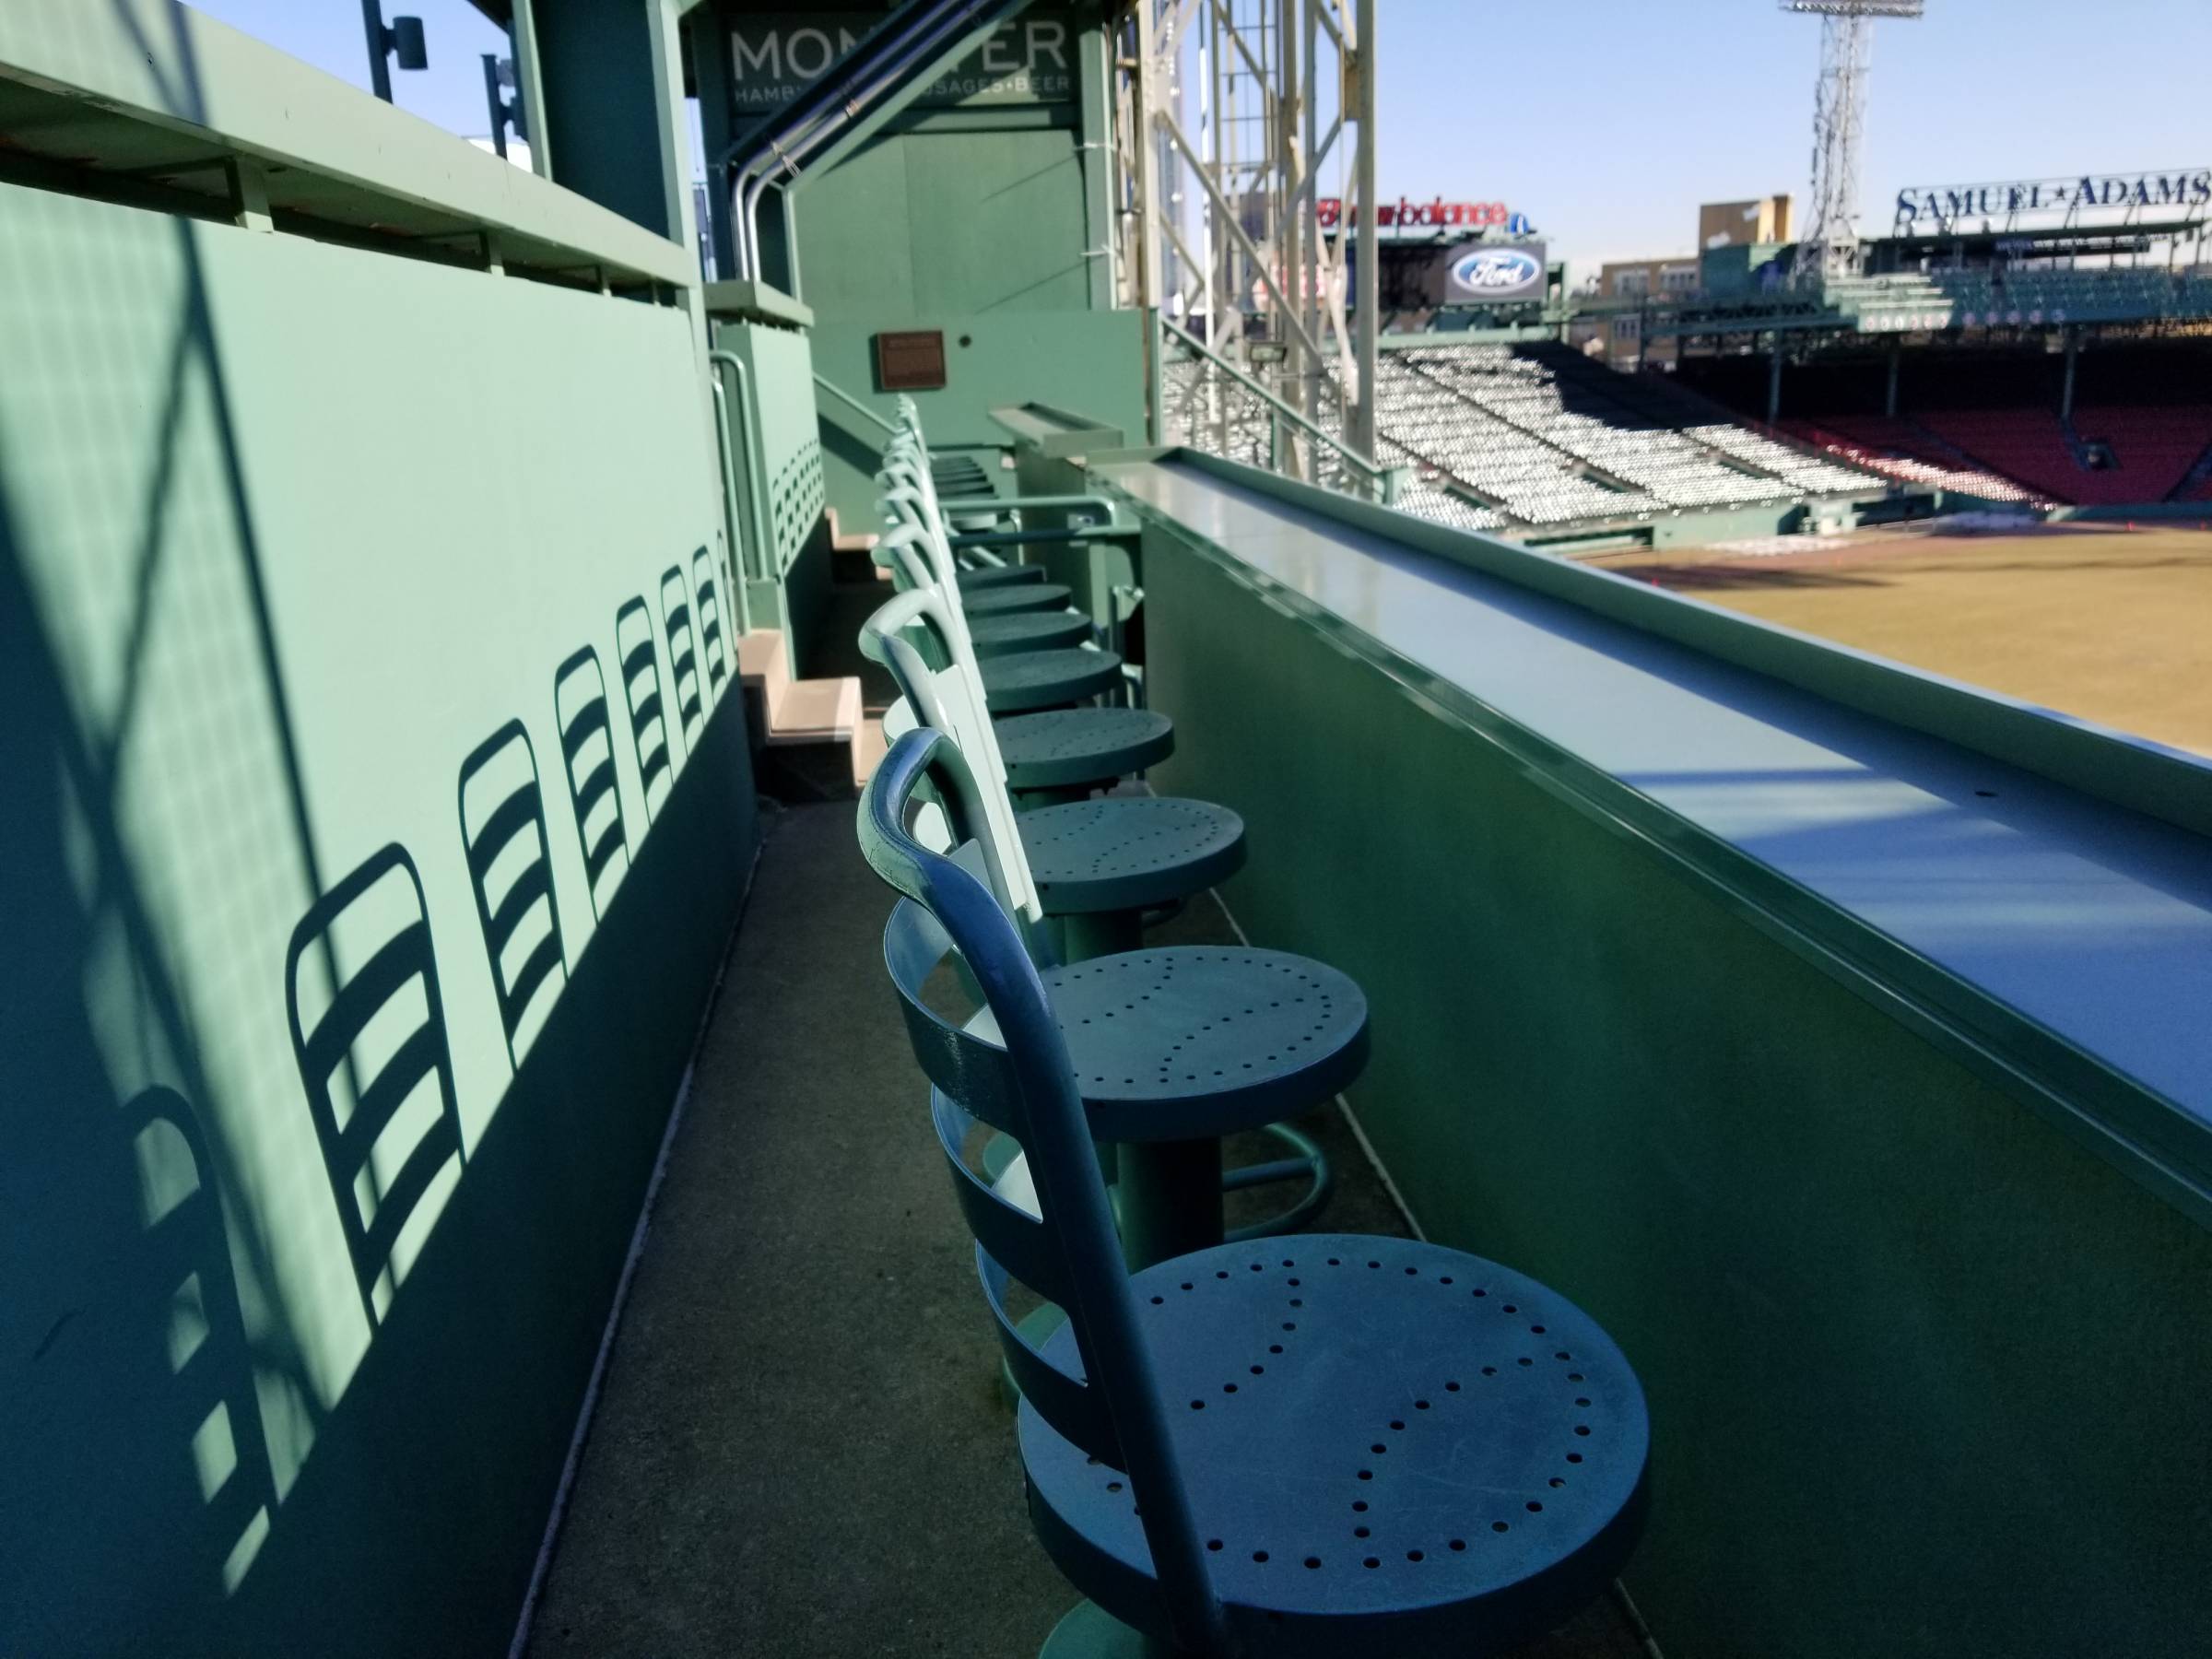 Front Row Green Monster Seats Fenway Park Boston Redsox Oakland